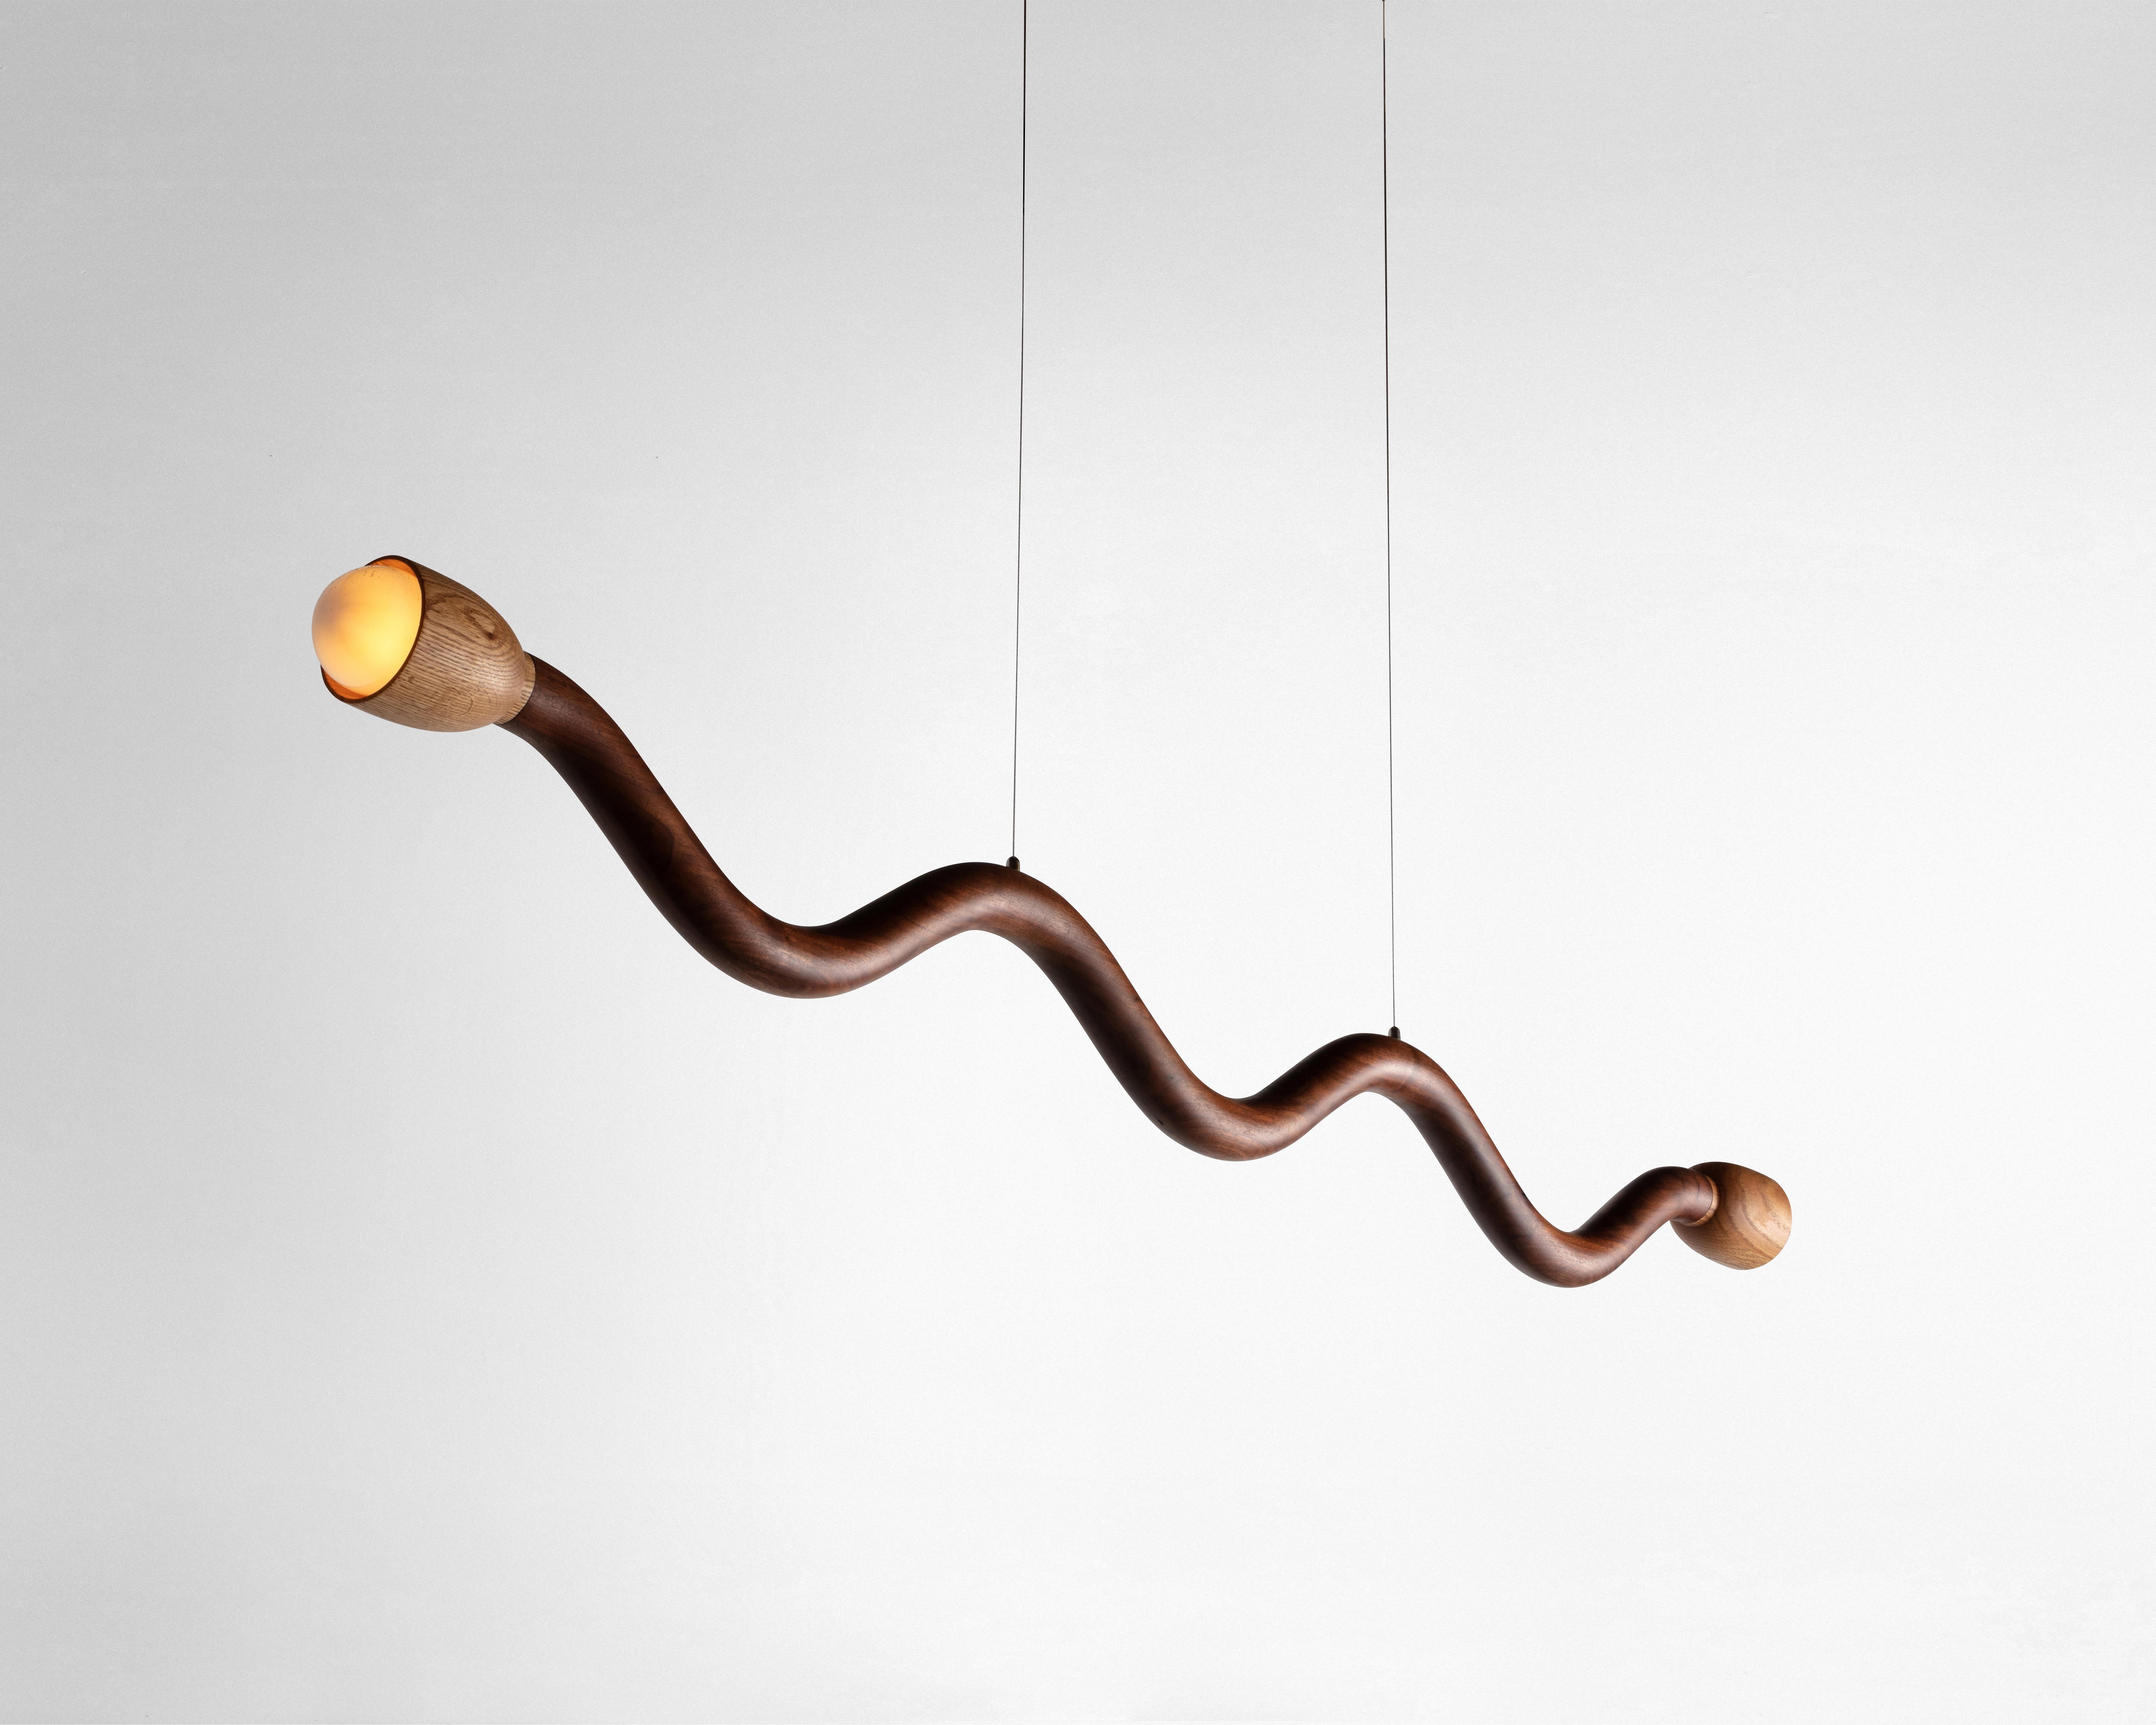 The Squiggle light was created though an exploration of shaping solid walnut slab lumber. Designed to bring a smile to any space, each light is thoughtfully selected to highlight the grain pattern and characteristics of American black walnut. Each